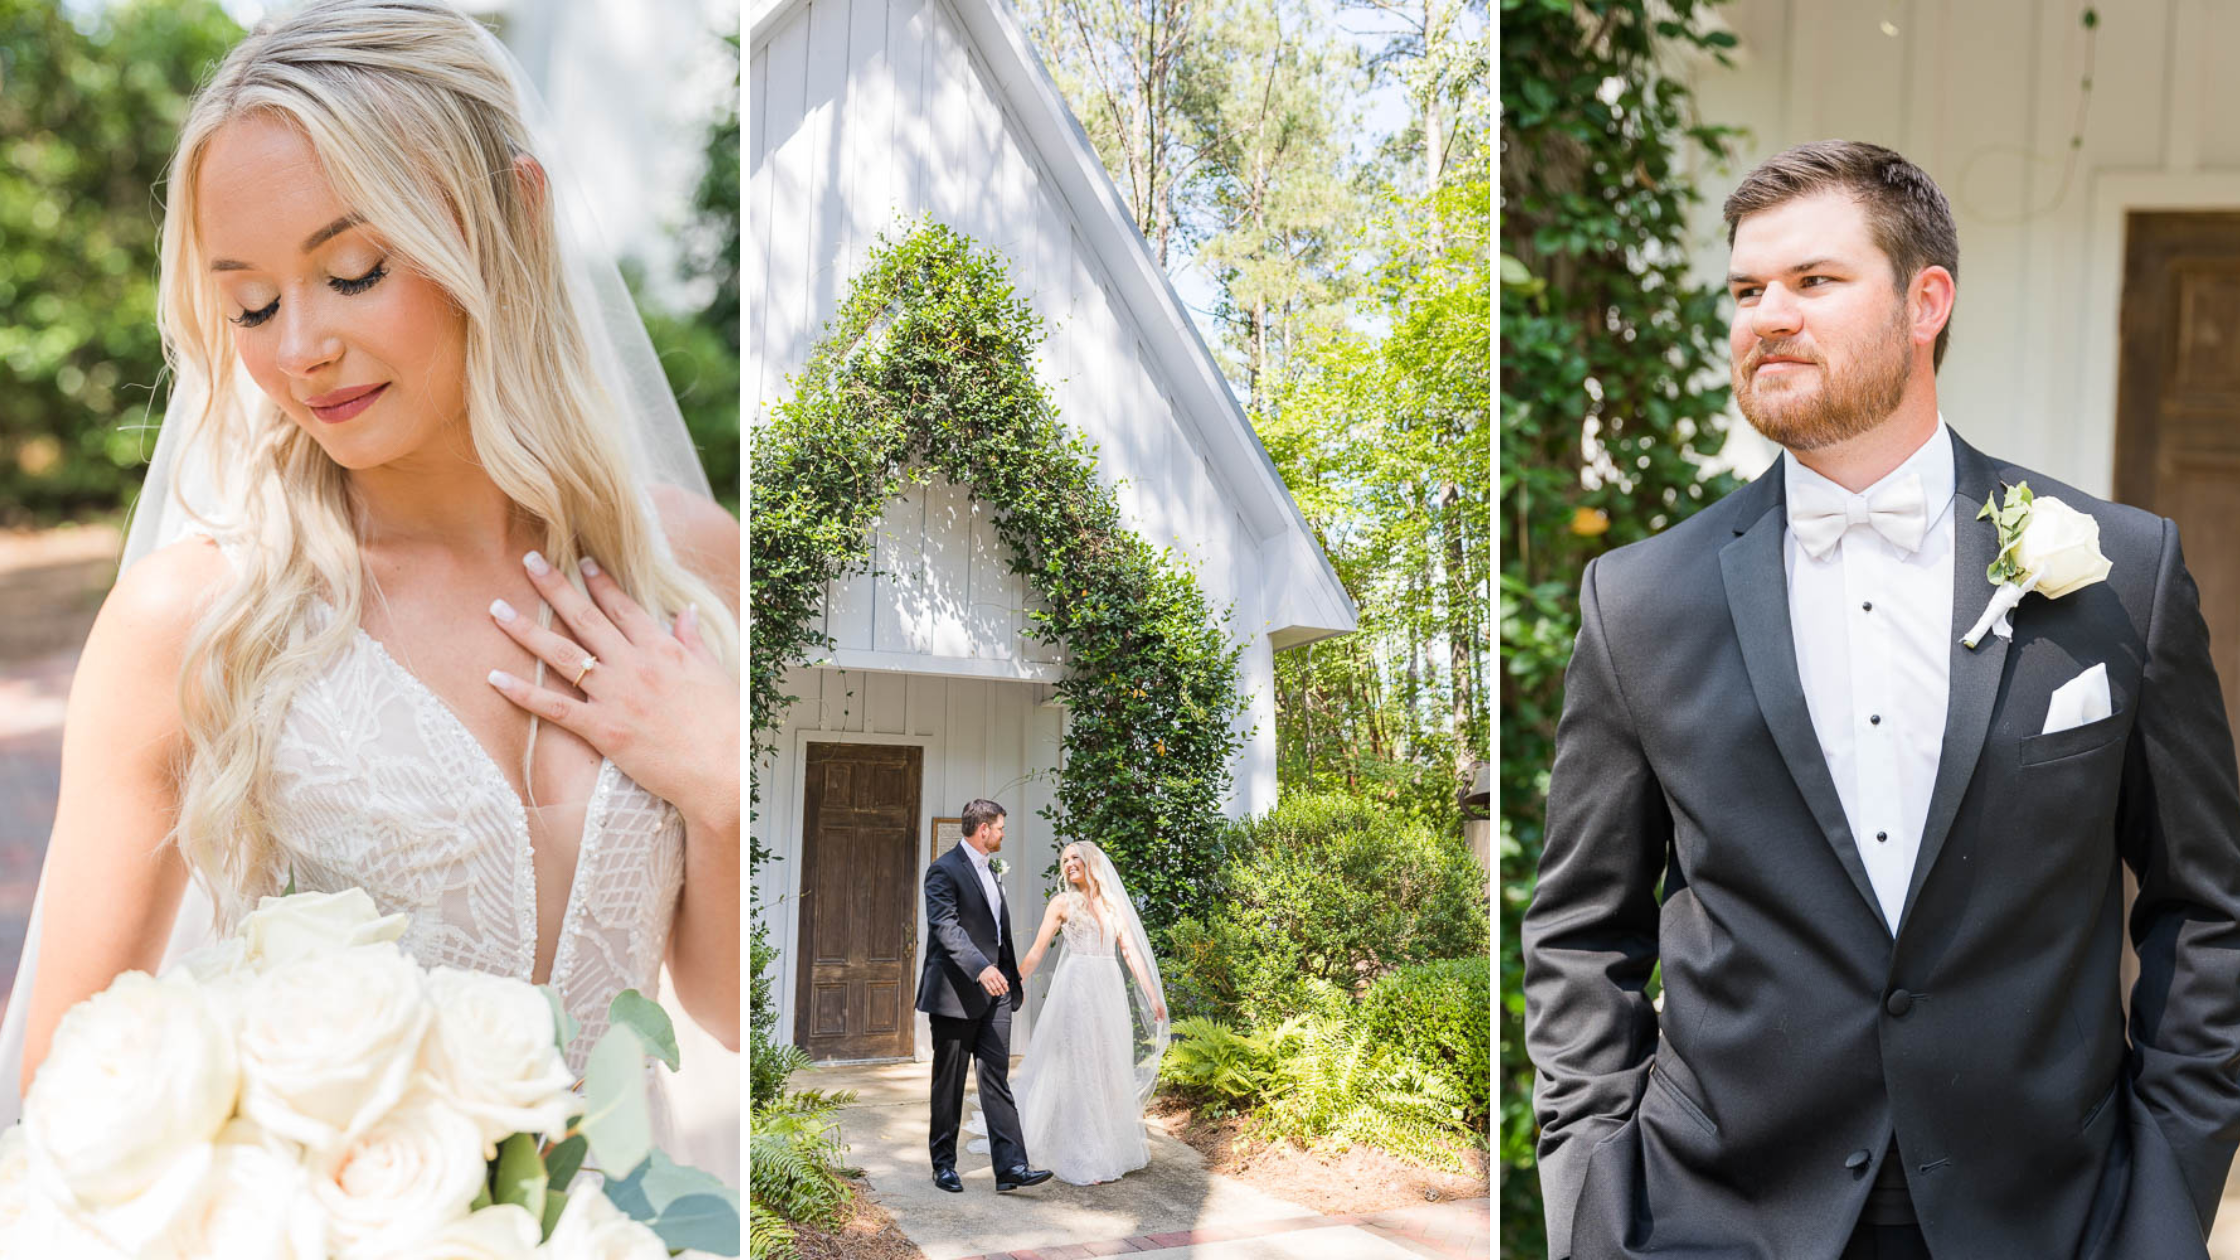 Steelwood Country Club Wedding in Loxely Alabama Photographed by Kristen Marcus Photography | Alabama Wedding Photographer for Detail Oriented Brides